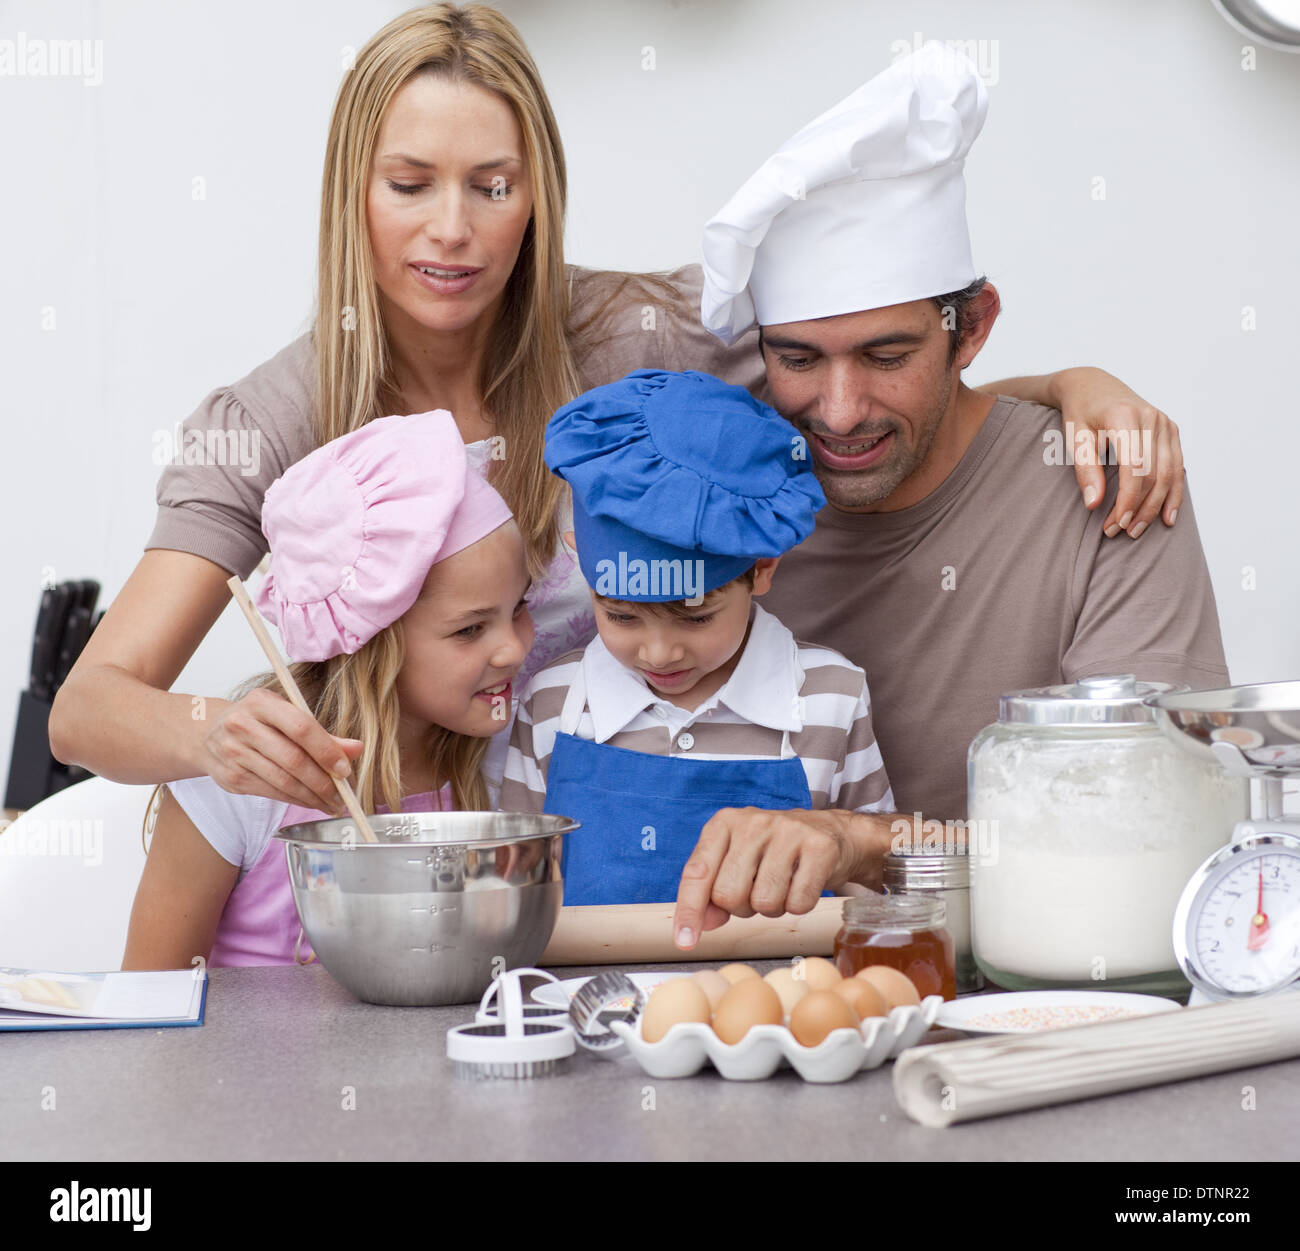 Children baking cookies with their parents Stock Photo